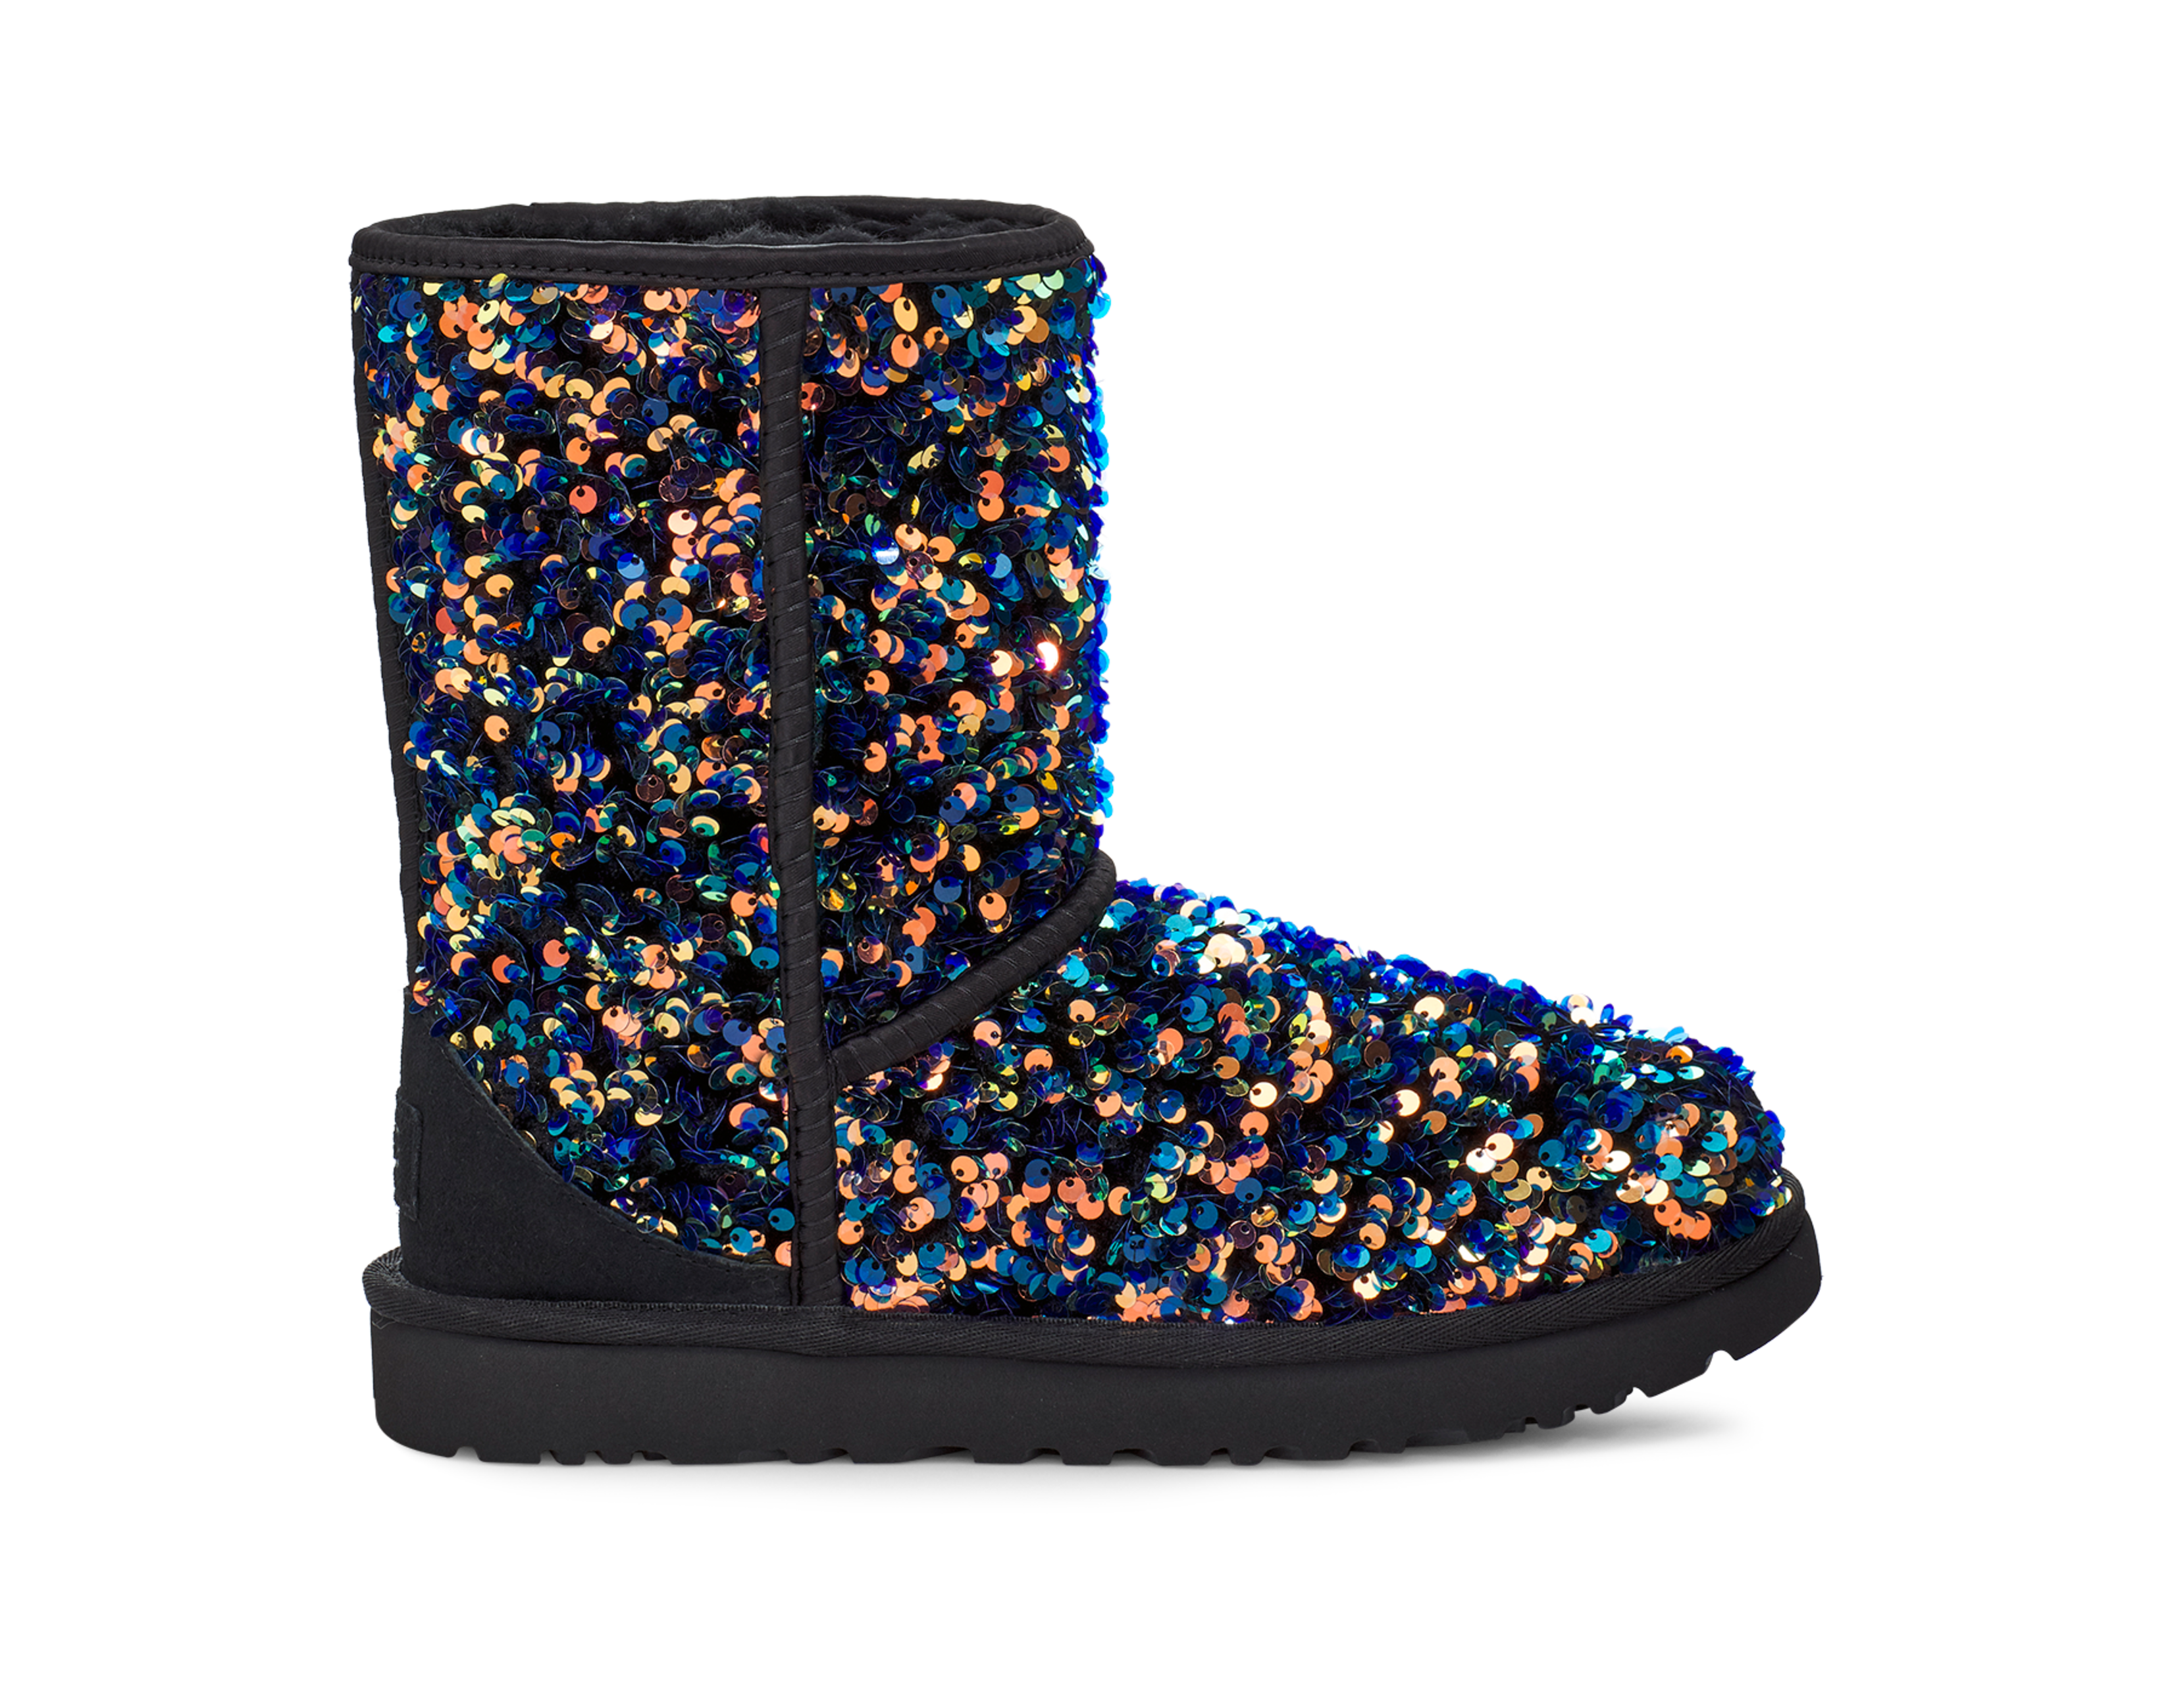 UGG Classic Short Sequin Boot Size 8 - $149 New With Tags - From Awuraposh